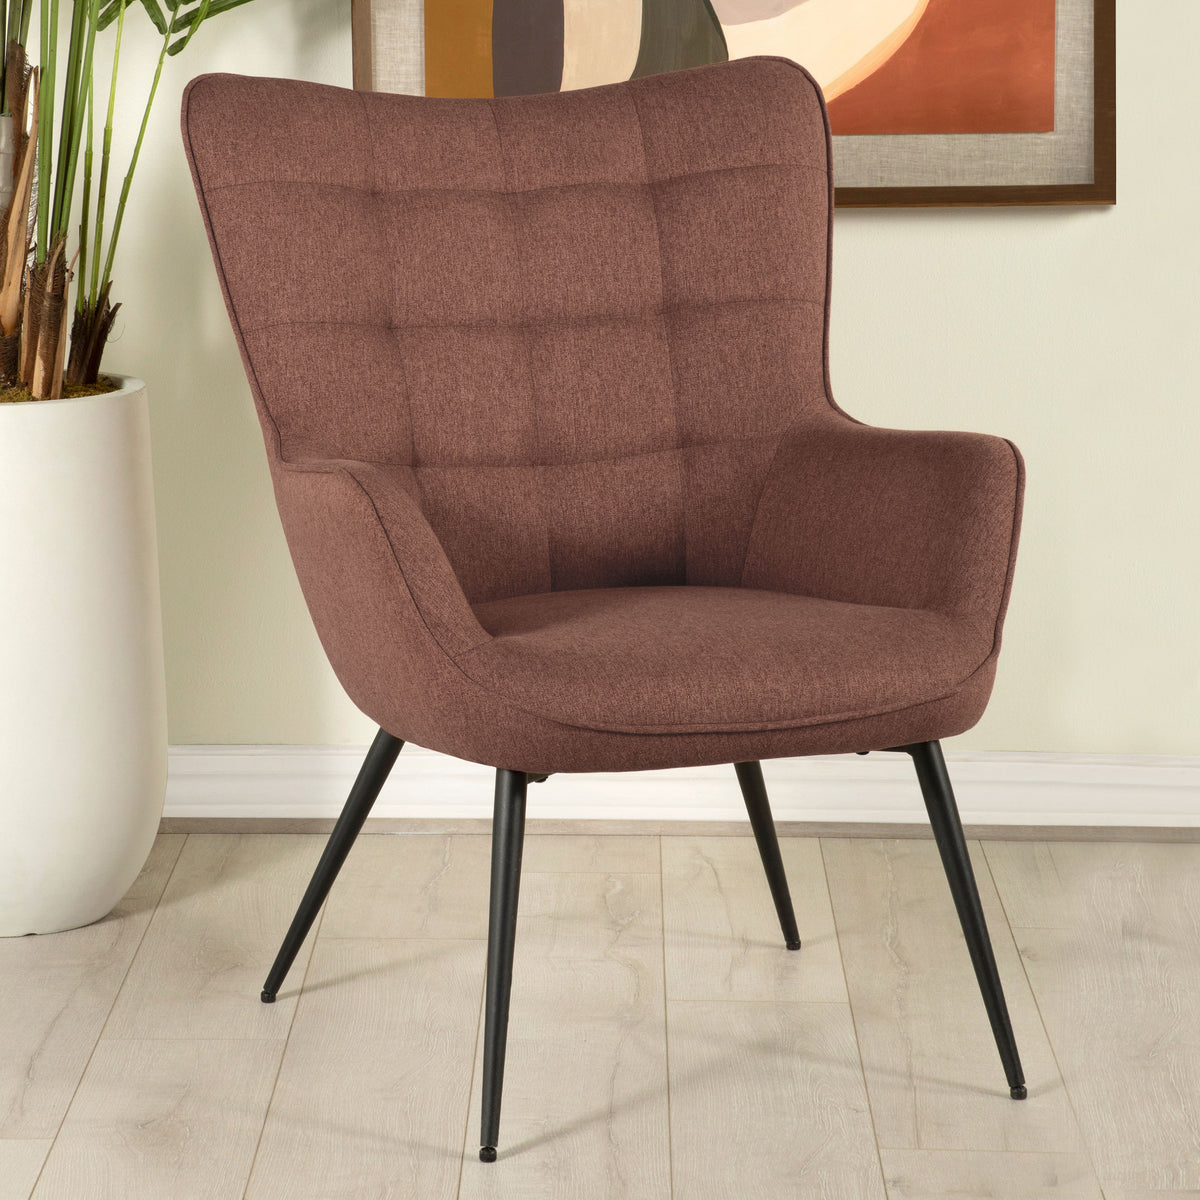 Isla Upholstered Flared Arms Accent Chair with Grid Tufted Isla Upholstered Flared Arms Accent Chair with Grid Tufted Half Price Furniture